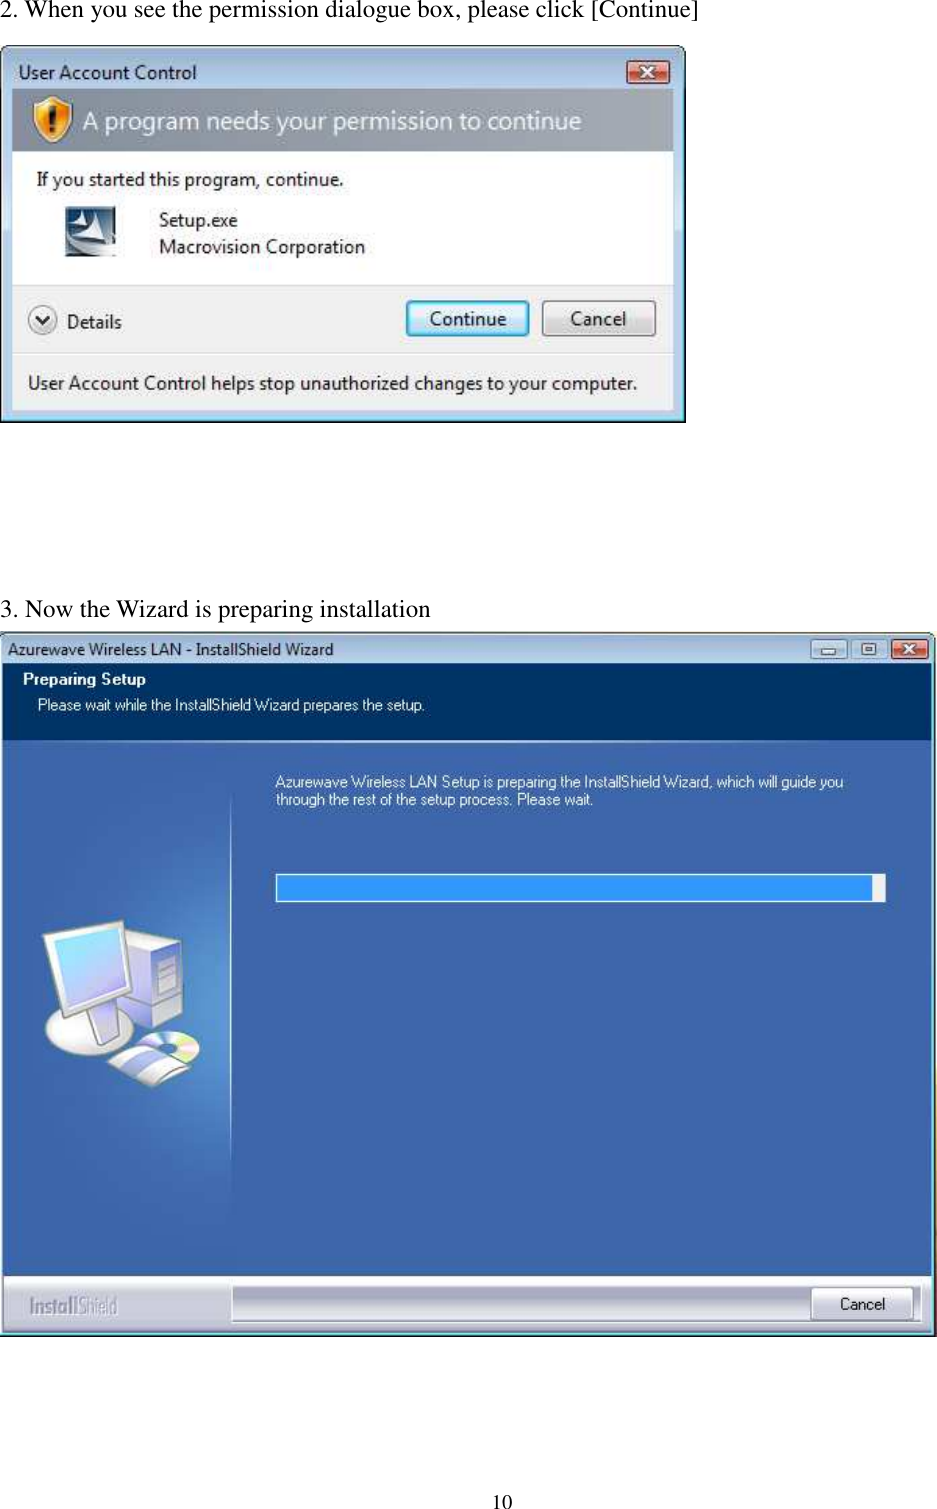   10 2. When you see the permission dialogue box, please click [Continue]      3. Now the Wizard is preparing installation      